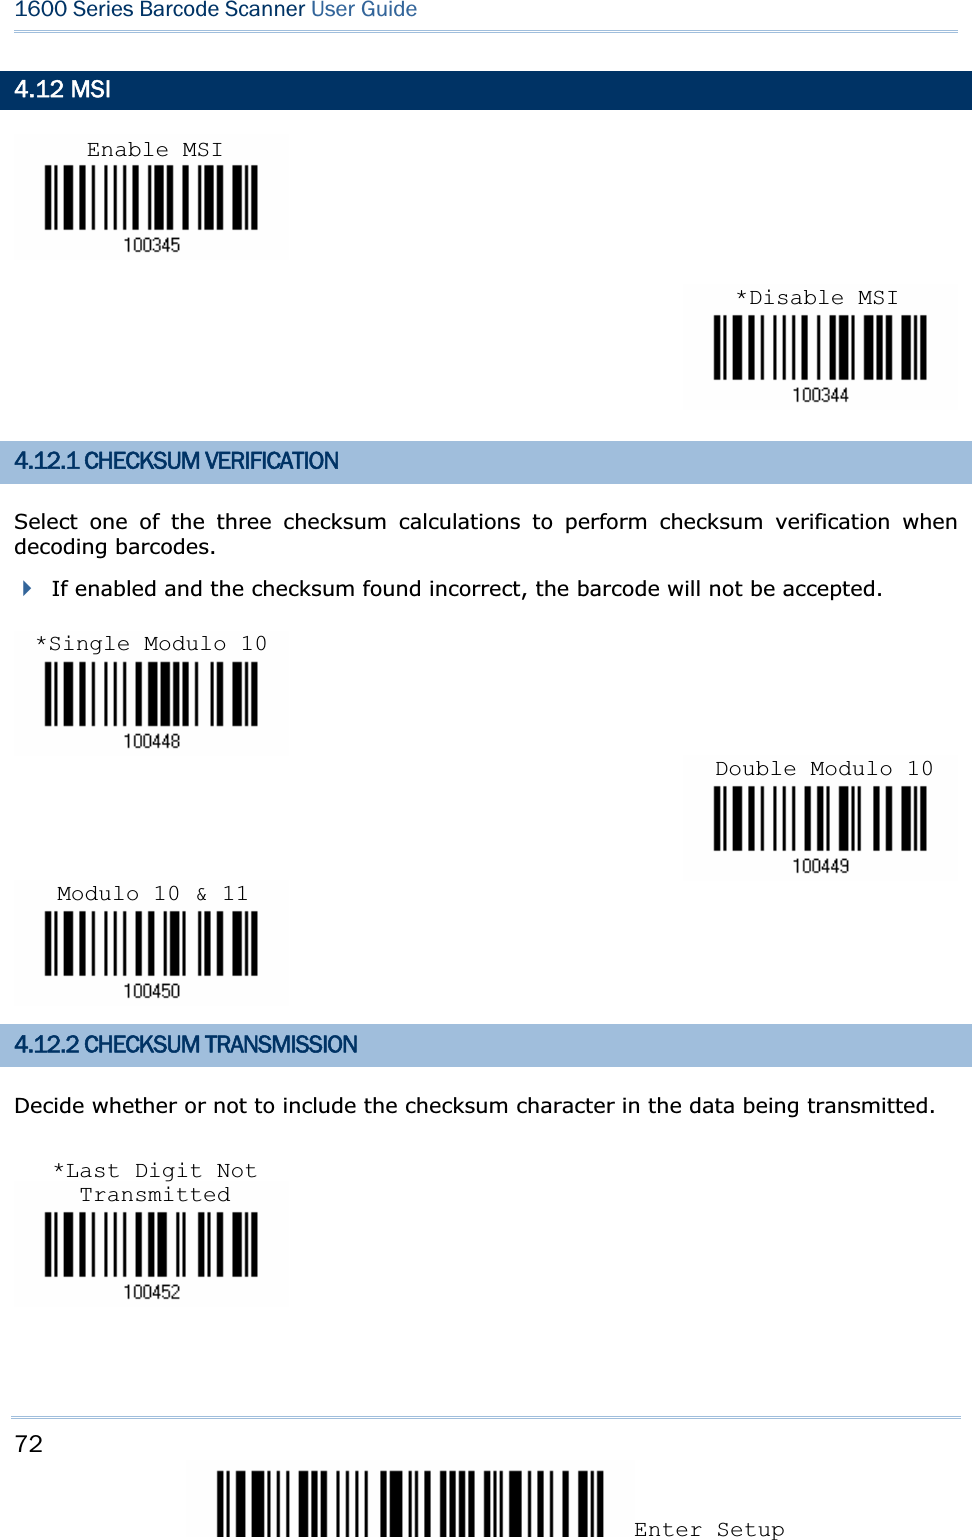 72Enter Setup 1600 Series Barcode Scanner User Guide4.12 MSI 4.12.1 CHECKSUM VERIFICATION Select one of the three checksum calculations to perform checksum verification when decoding barcodes. If enabled and the checksum found incorrect, the barcode will not be accepted. 4.12.2 CHECKSUM TRANSMISSION Decide whether or not to include the checksum character in the data being transmitted. Enable MSI*Disable MSI*Single Modulo 10Double Modulo 10Modulo 10 &amp; 11*Last Digit Not Transmitted